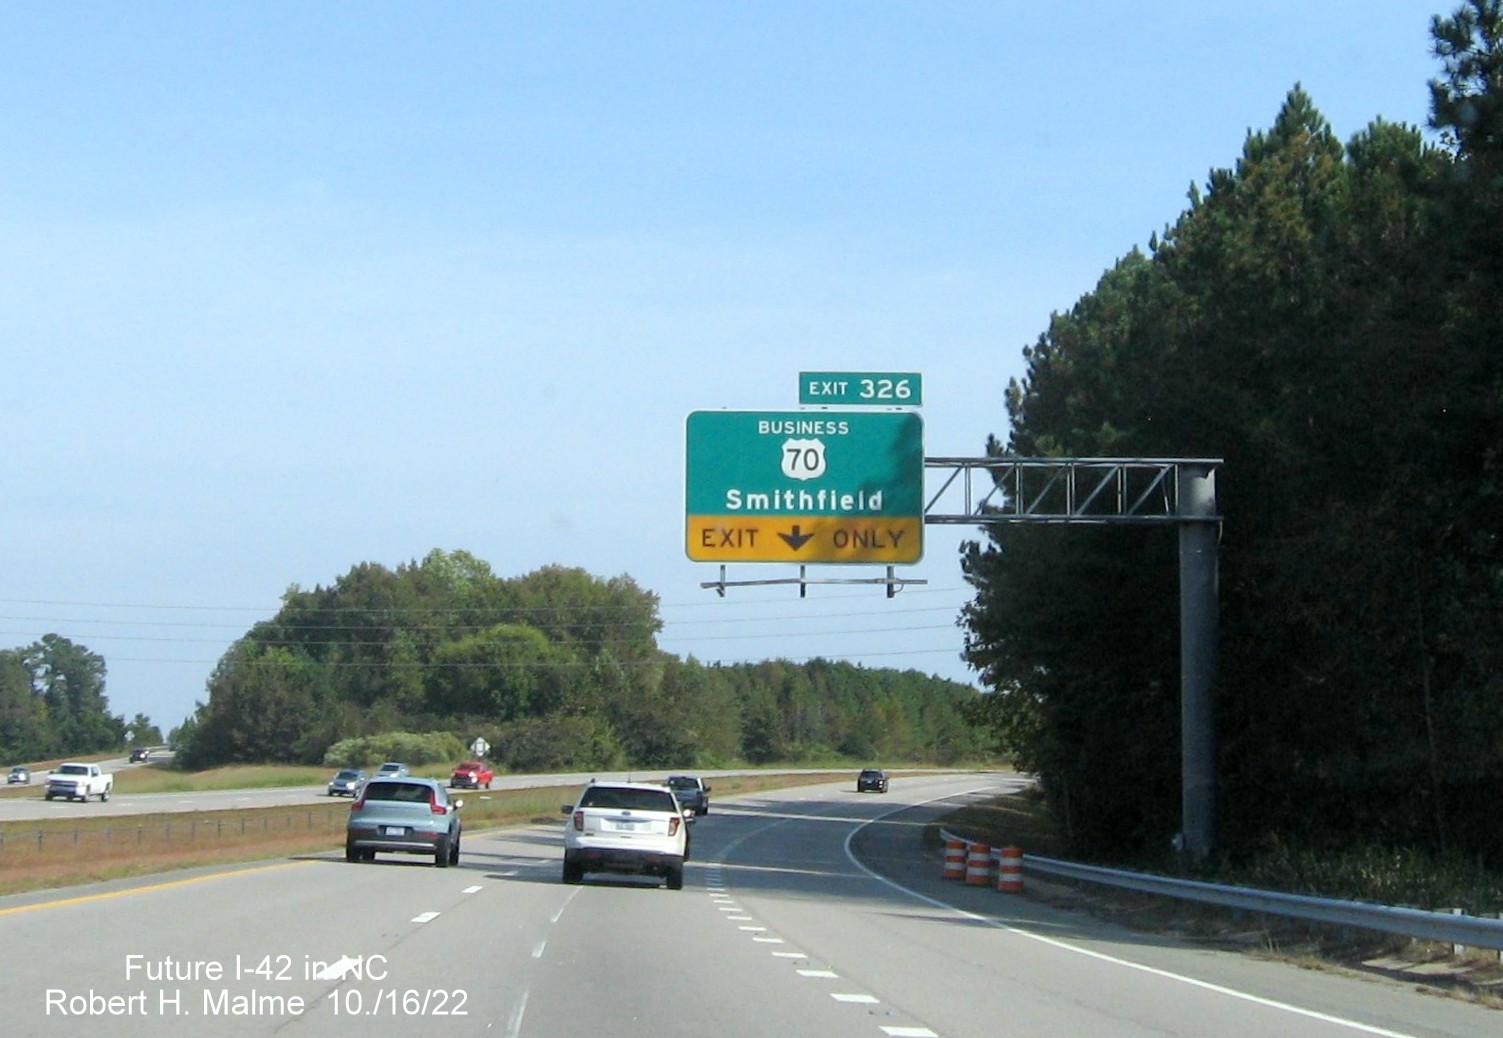 Image of overhead ramp sign for Business 70 exit on US 70 (Future I-42) East Clayton Bypass, October 2022